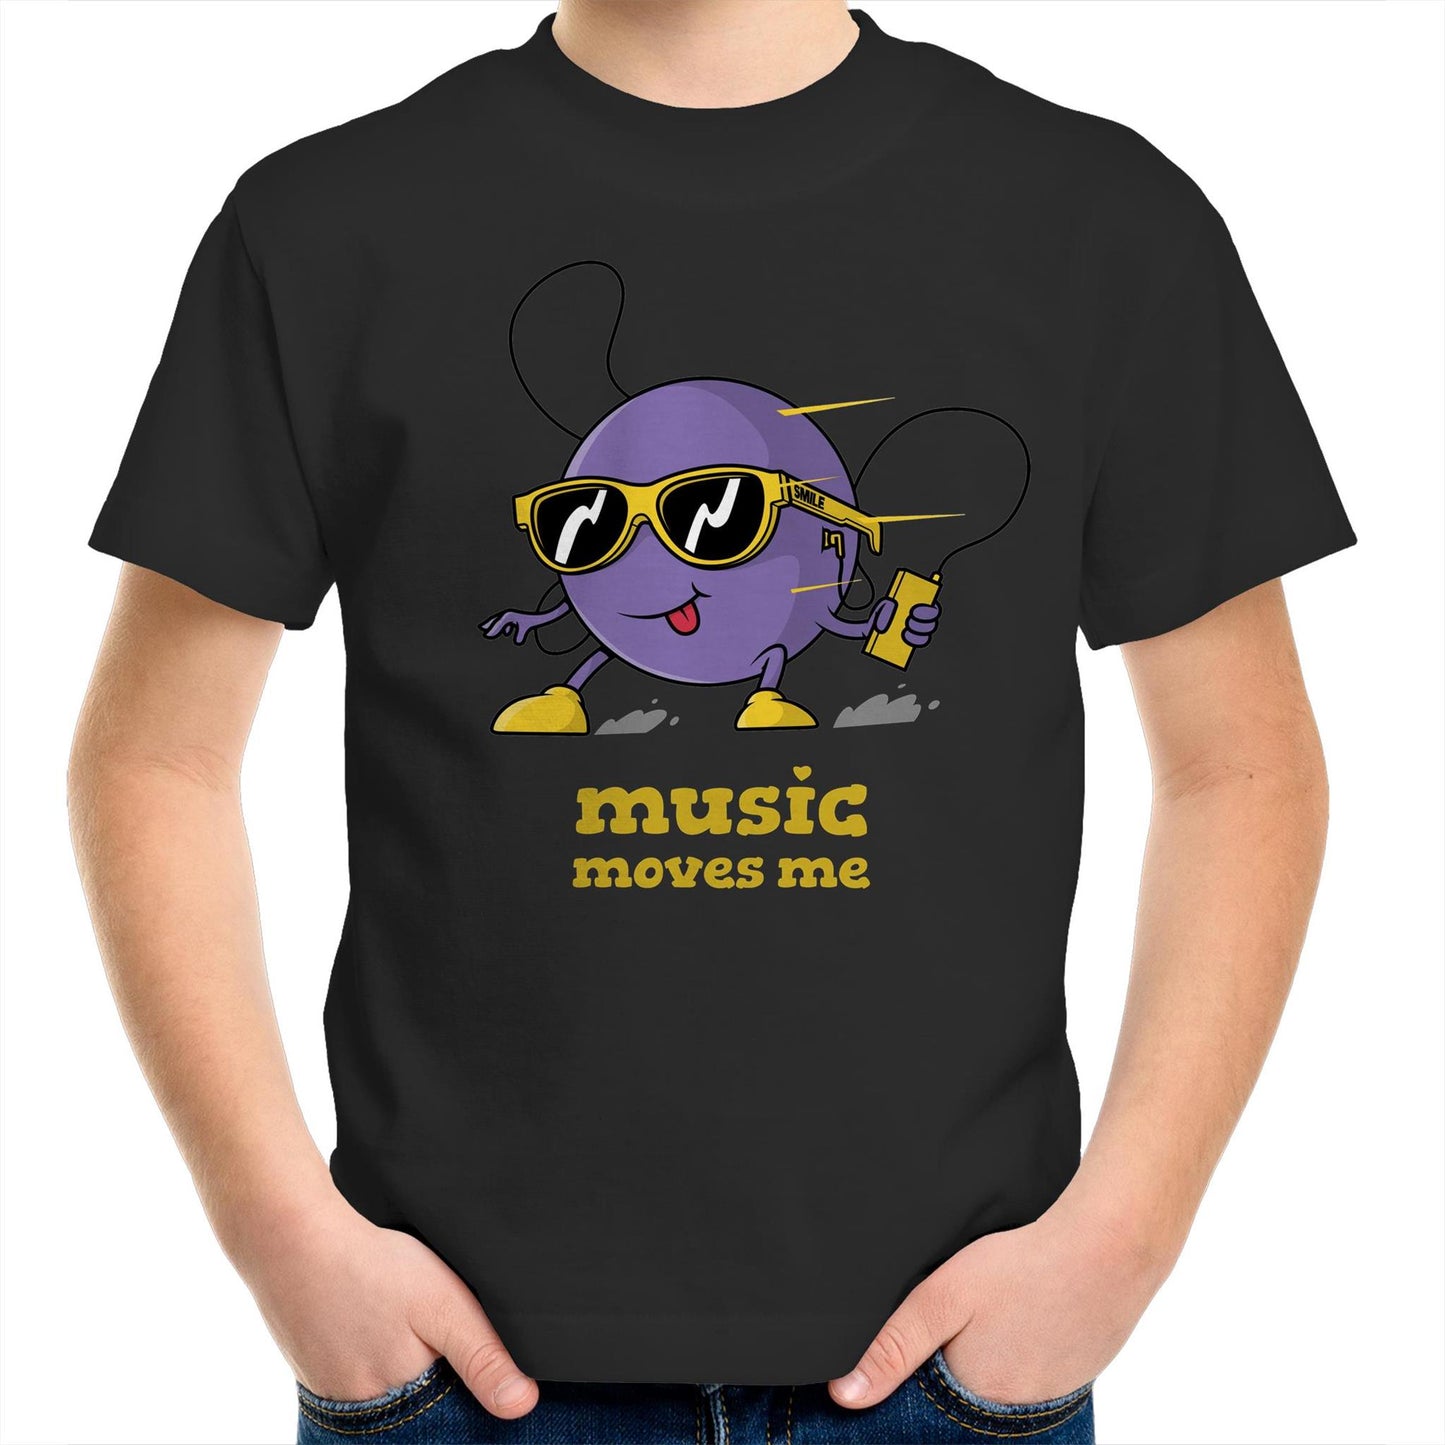 Music Moves Me, Earbuds - Kids Youth T-Shirt Black Kids Youth T-shirt Music